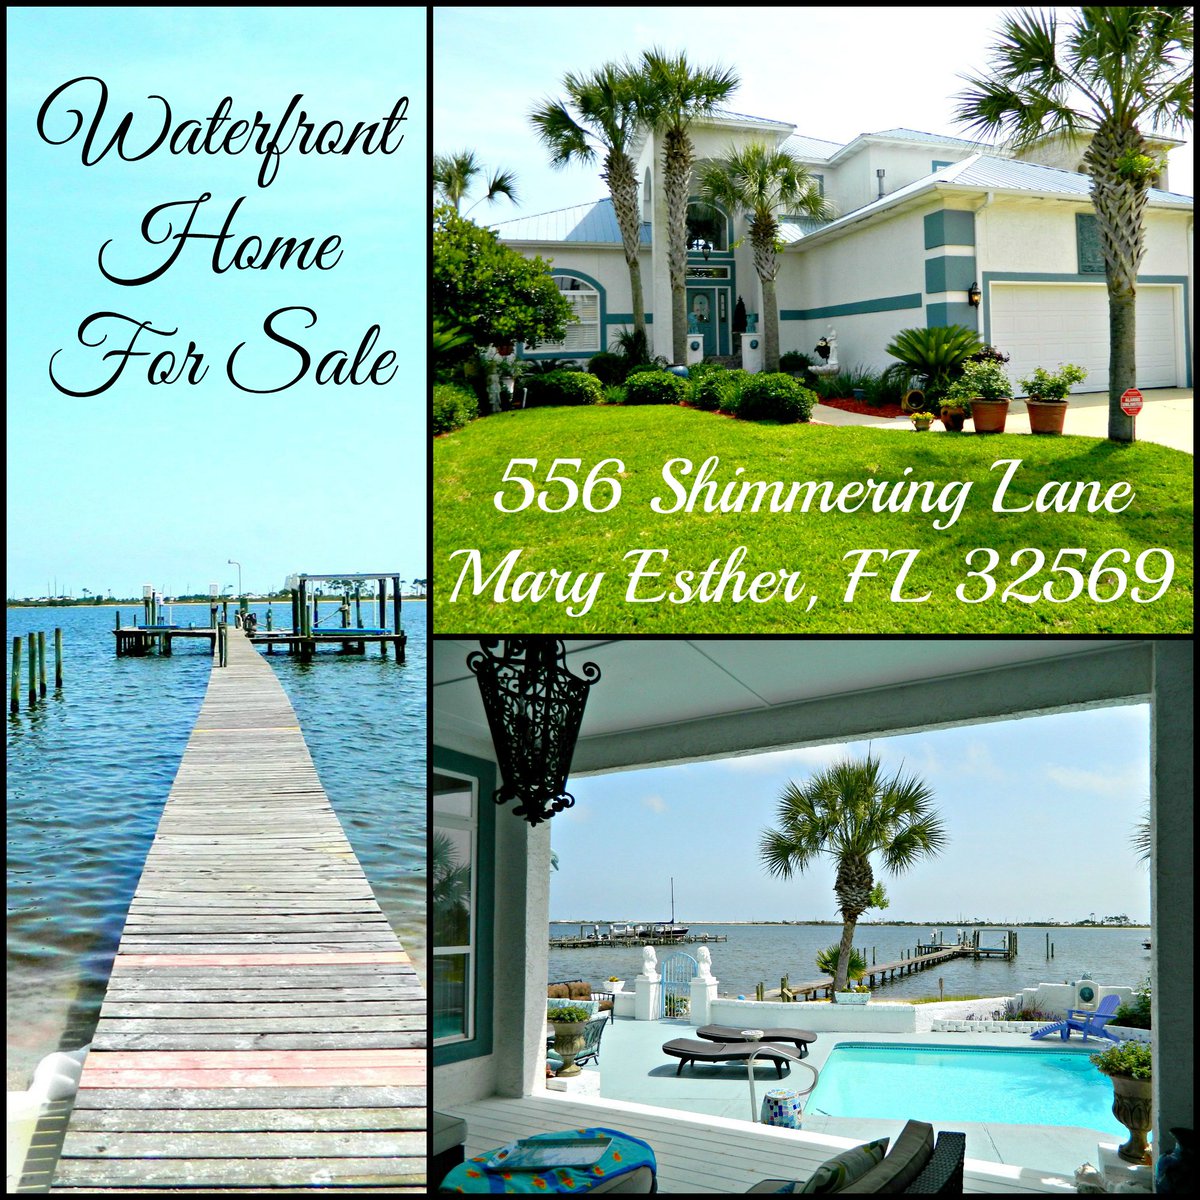 Seller MUST SELL - #Relocating - 3 Bed/2.5 Bath CUSTOM #WATERFRONTHOMEFORSALE in #MaryEsther buff.ly/1nm825M